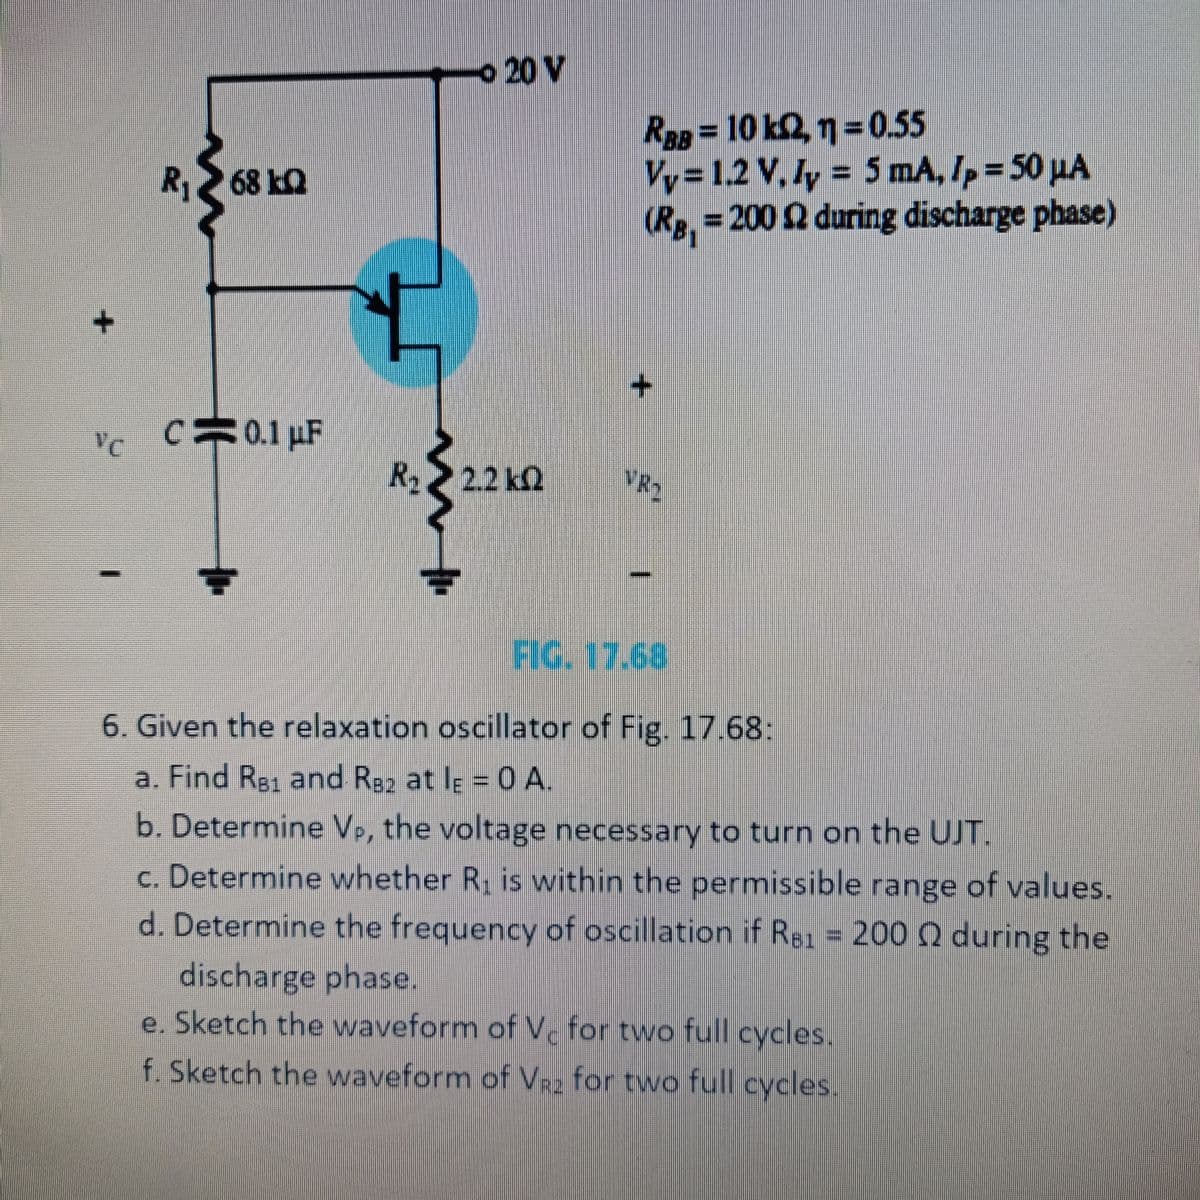 +
R₁68kQ
VC
C C 0.1 μF
www.l
20 V
R >> 22 kΩ
RBB = 10 k2, 1 = 0.55
Vy=1.2 V. ly = 5 mA, Ip = 50 µA
(Rg, = 200 £2 during discharge phase)
VRO
I
FIG. 17.68
6. Given the relaxation oscillator of Fig. 17.68:
a. Find RB1 and RB2 at lɛ = 0 A.
b. Determine V., the voltage necessary to turn on the UJT.
c. Determine whether R₁ is within the permissible range of values.
d. Determine the frequency of oscillation if R81 = 200 2 during the
discharge phase.
e. Sketch the waveform of V. for two full cycles.
f. Sketch the waveform of V₂ for two full cycles.